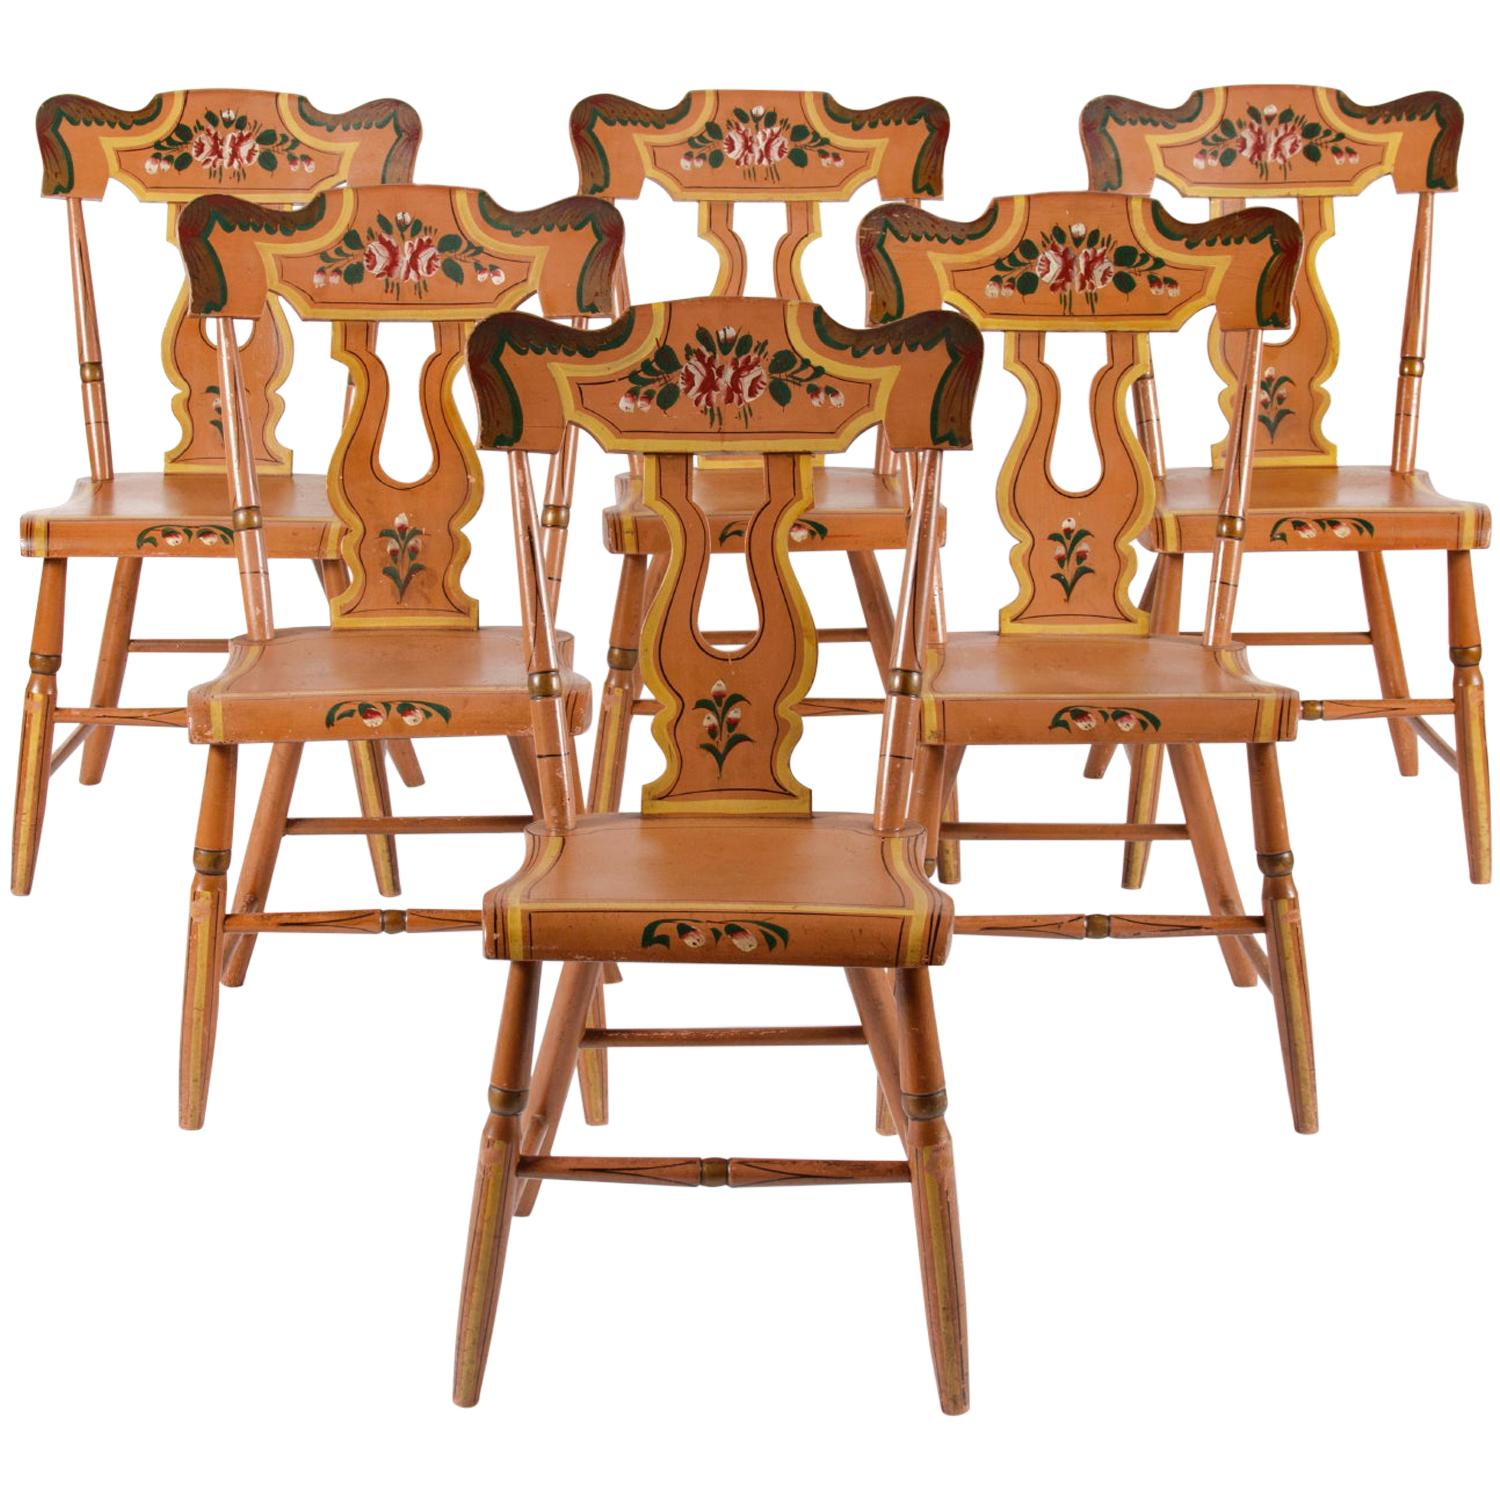 Set of 6 Salmon-Painted, Pennsylvania Decorated Chairs with Roses, 1845-65